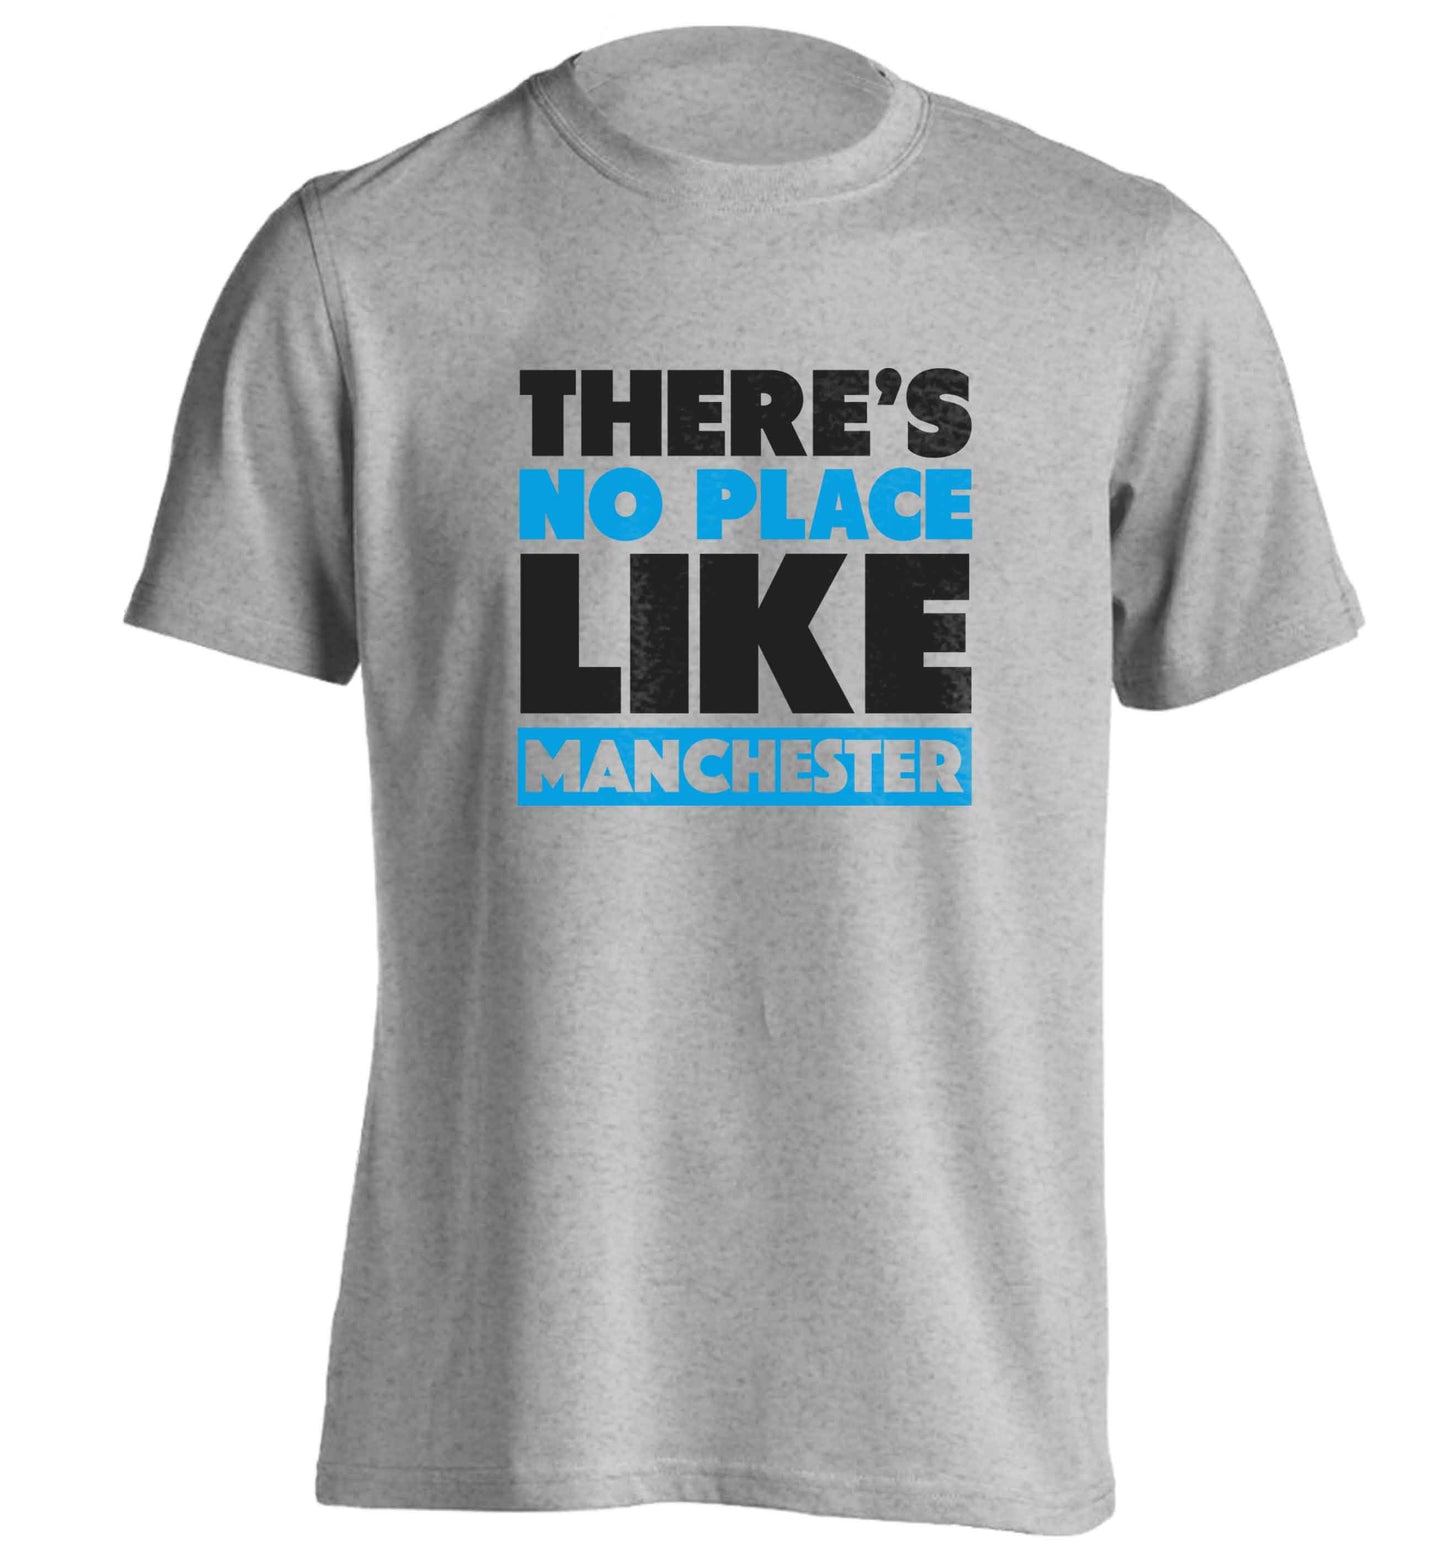 There's no place like Manchester adults unisex grey Tshirt 2XL